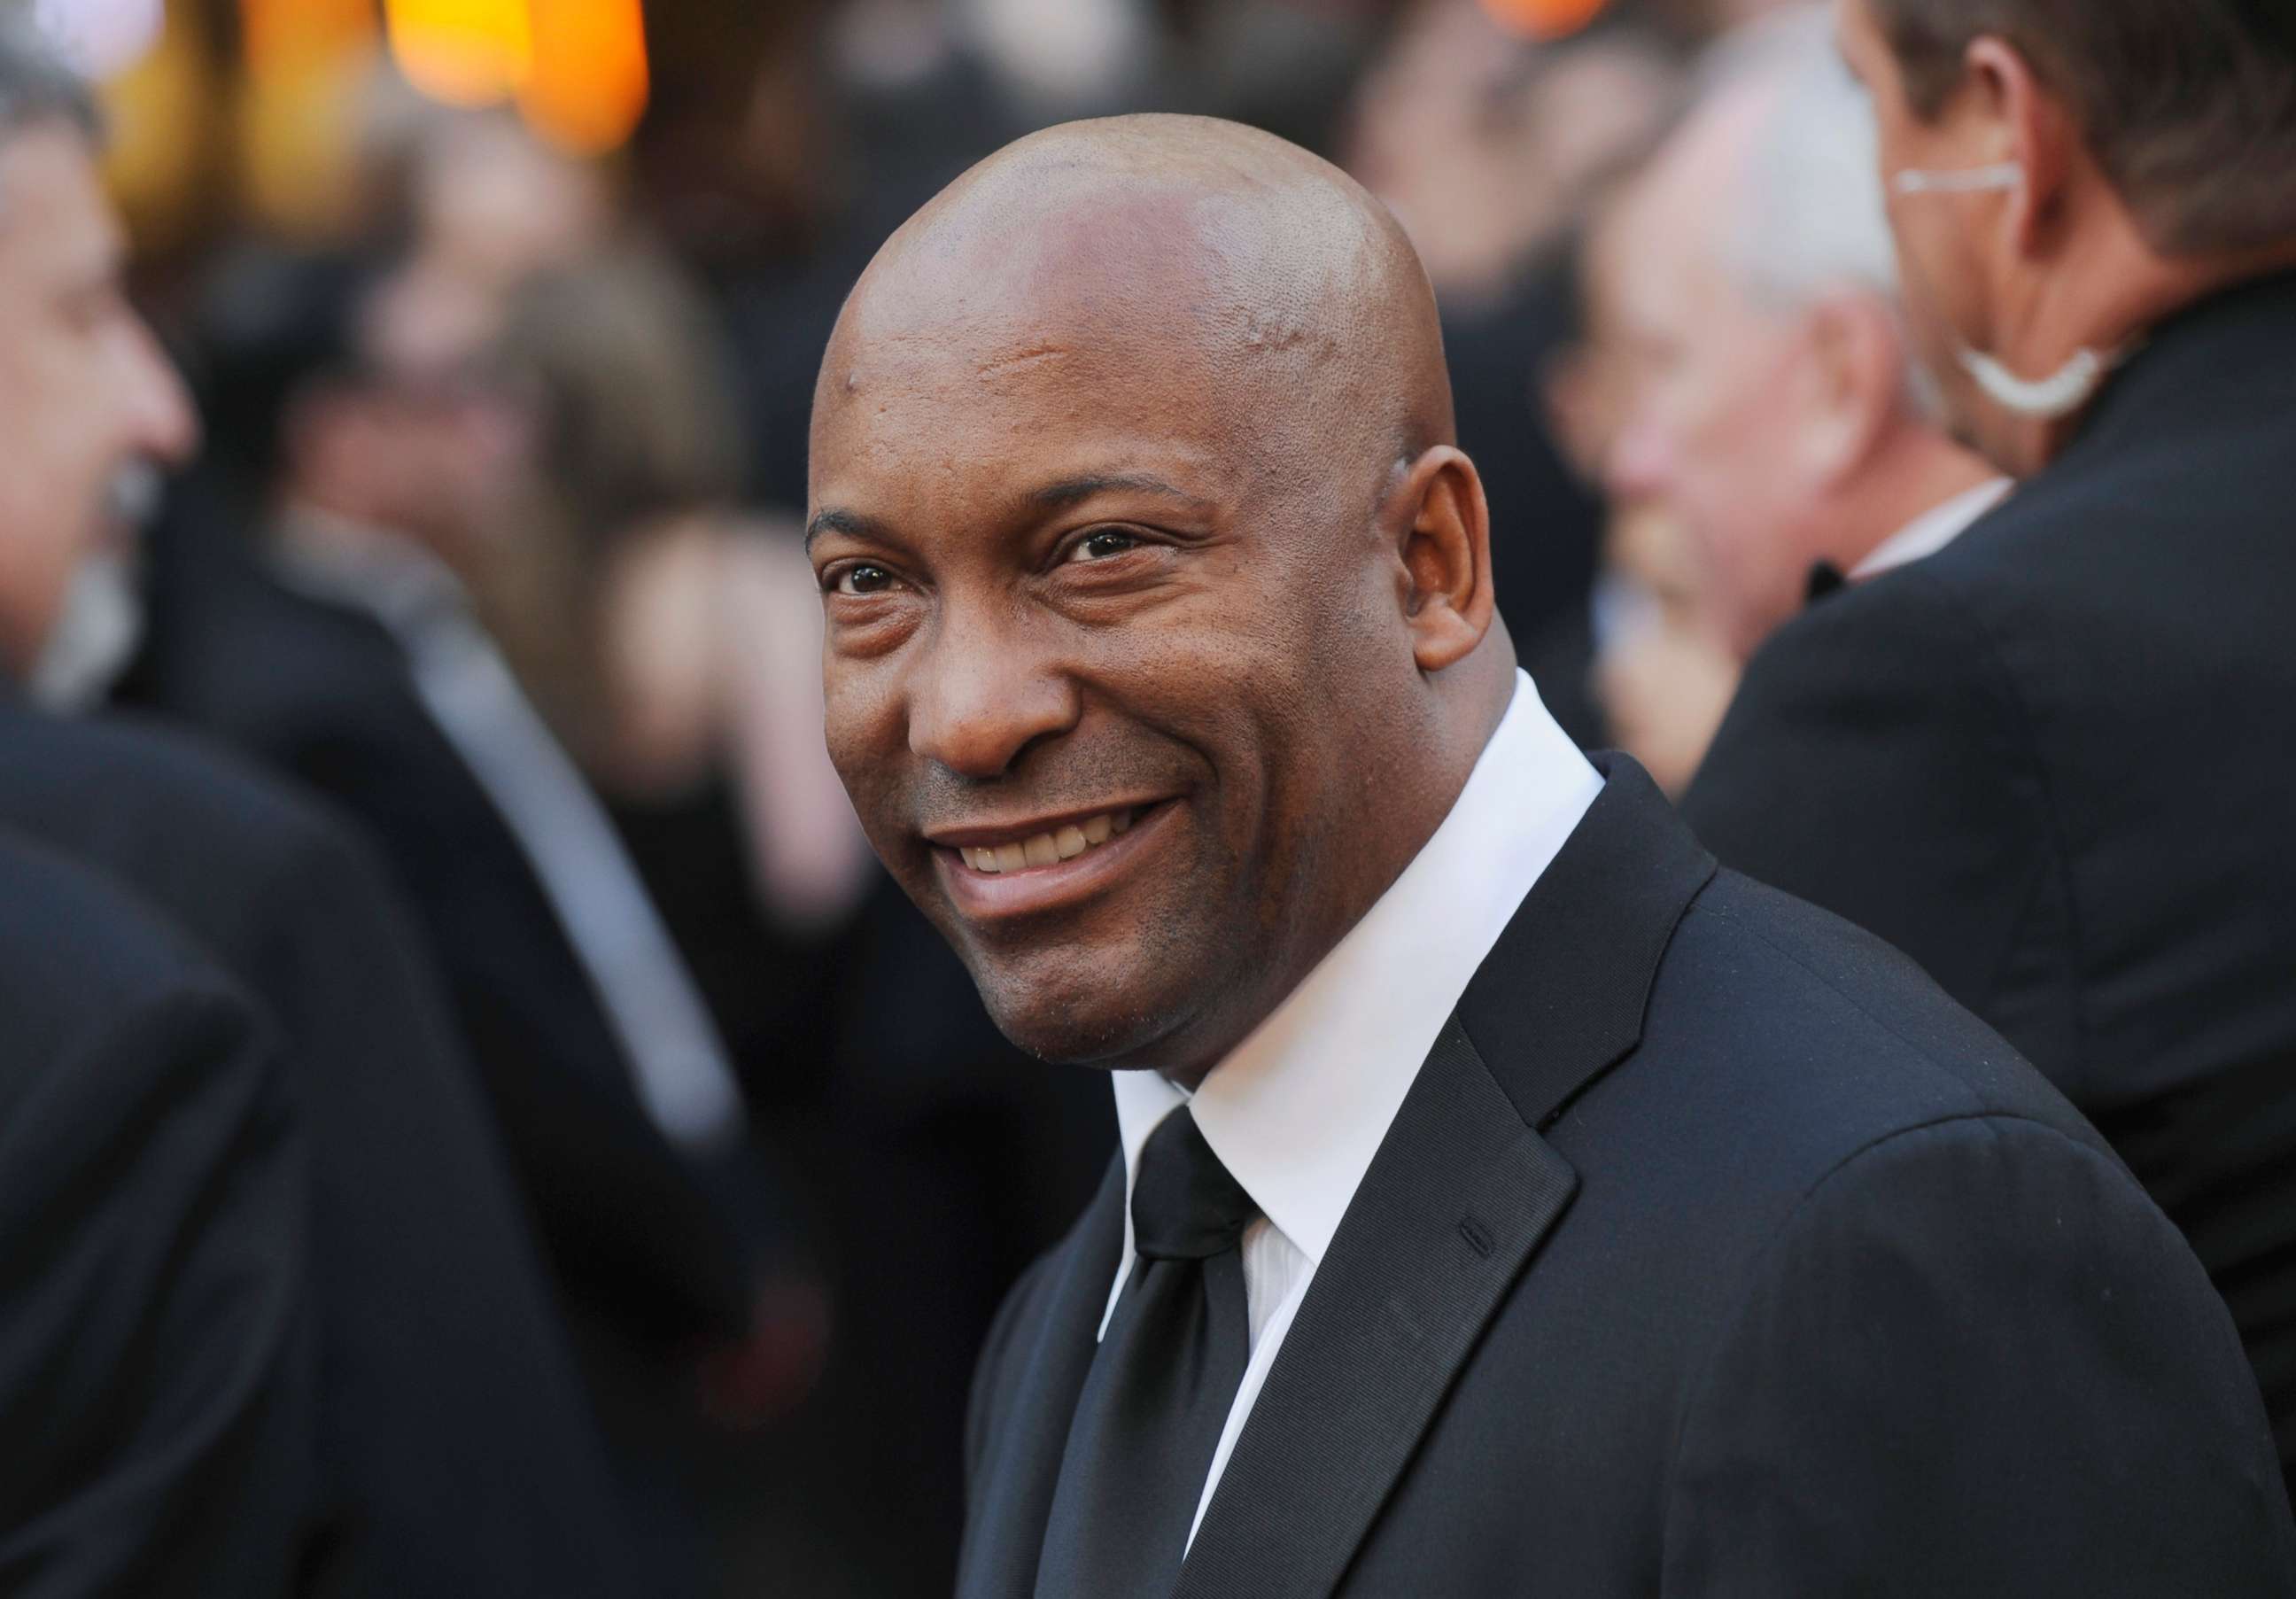 PHOTO: Director John Singleton arrives at the 80th Academy Awards in Los Angeles, Feb. 24, 2008.